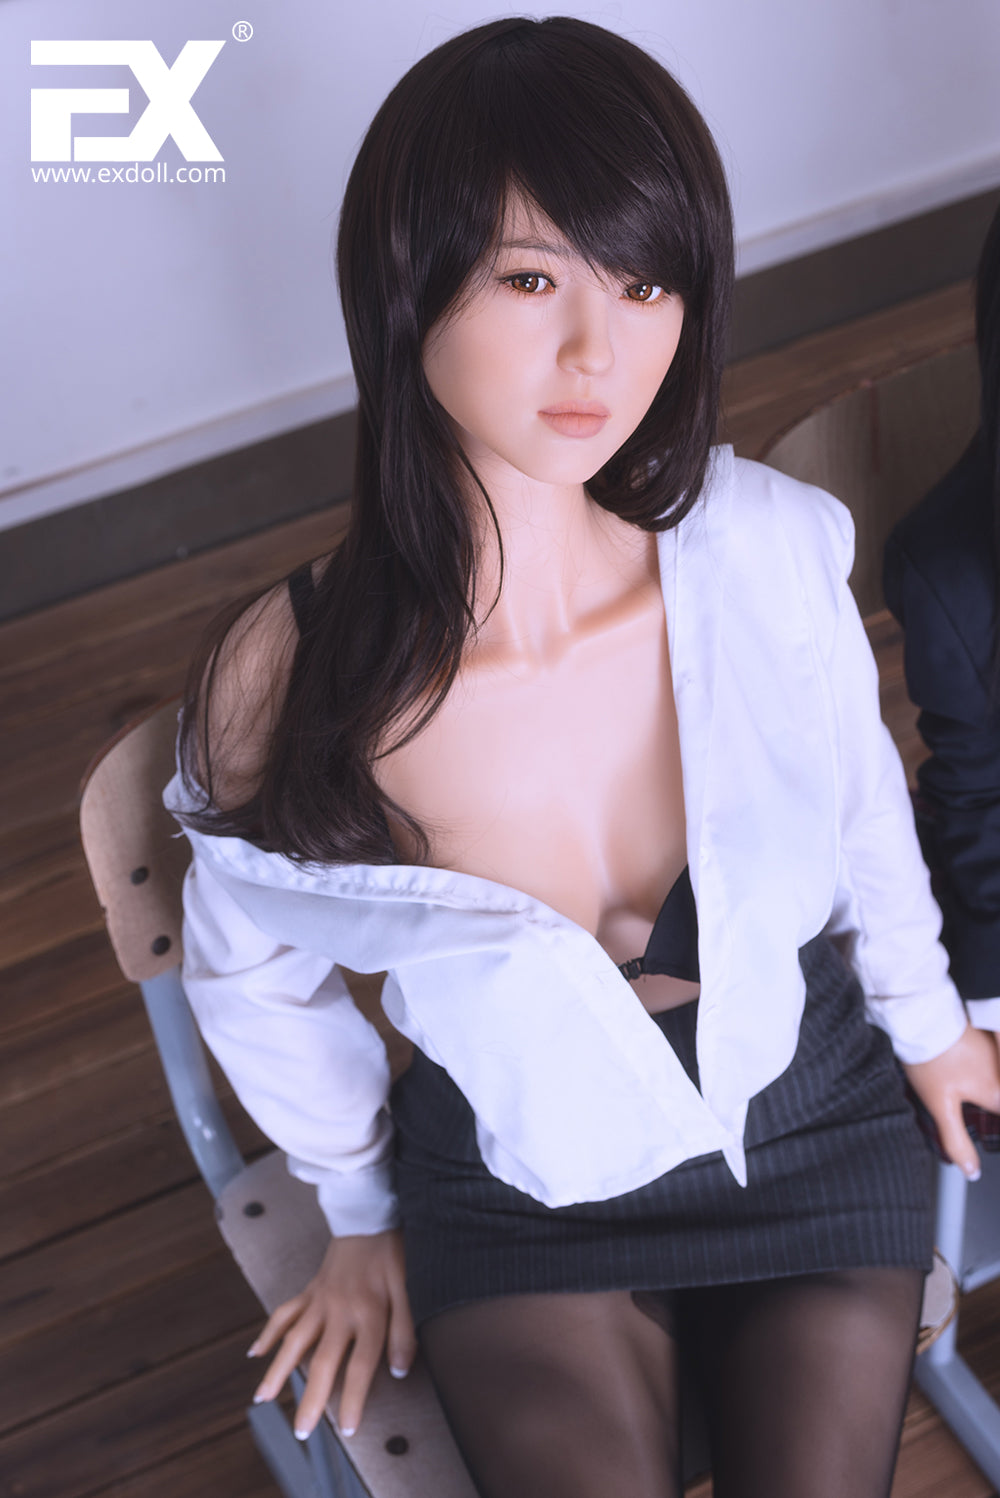 EX Doll Ukiyoe Series 170 cm Silicone - Mo Han | Buy Sex Dolls at DOLLS ACTUALLY